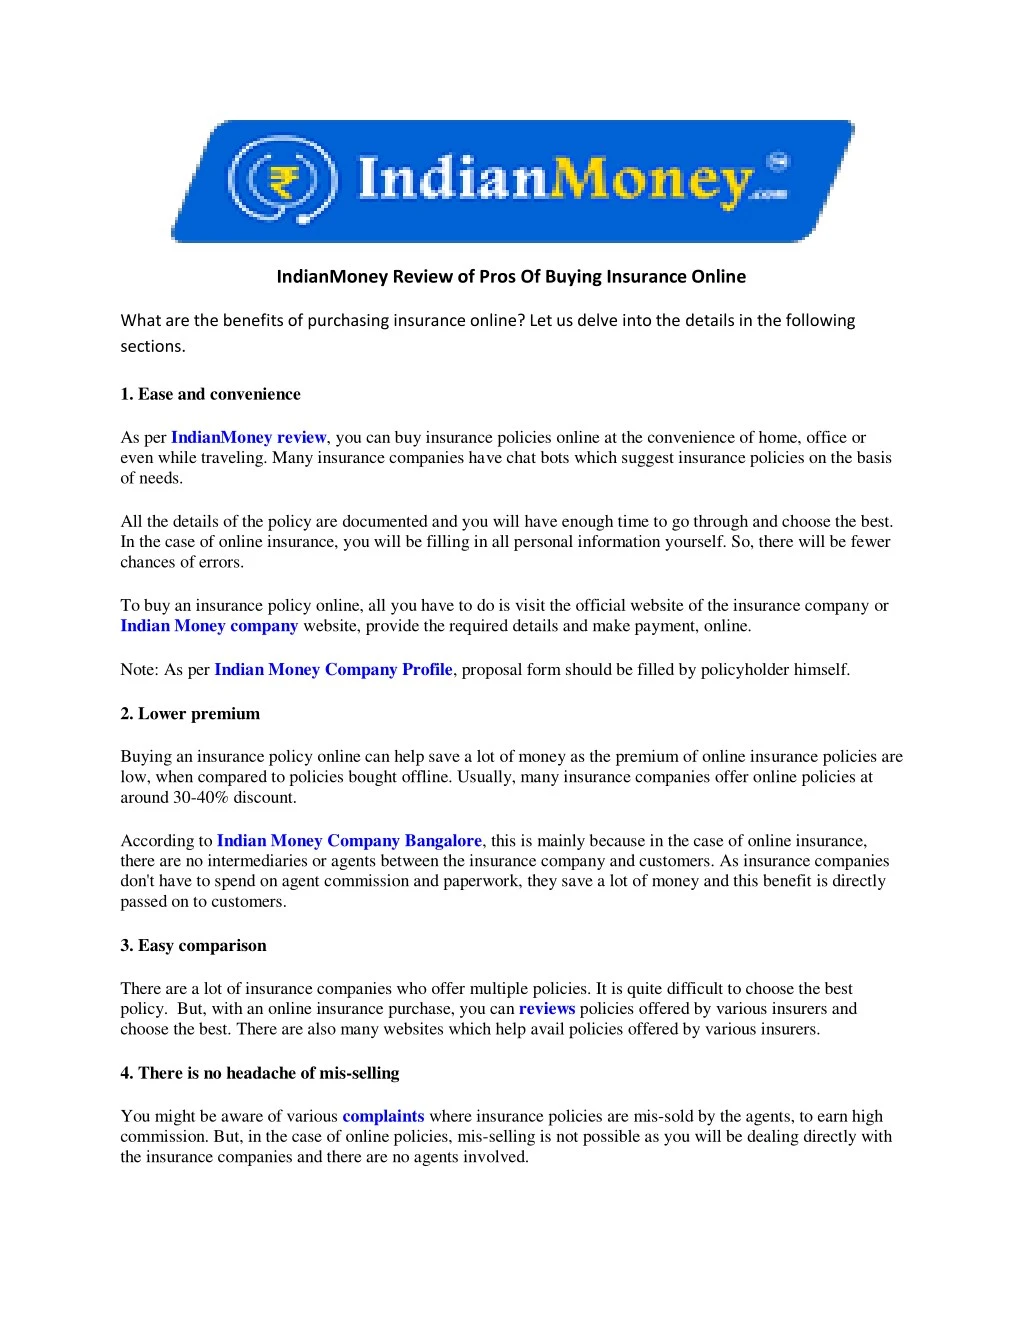 indianmoney review of pros of buying insurance